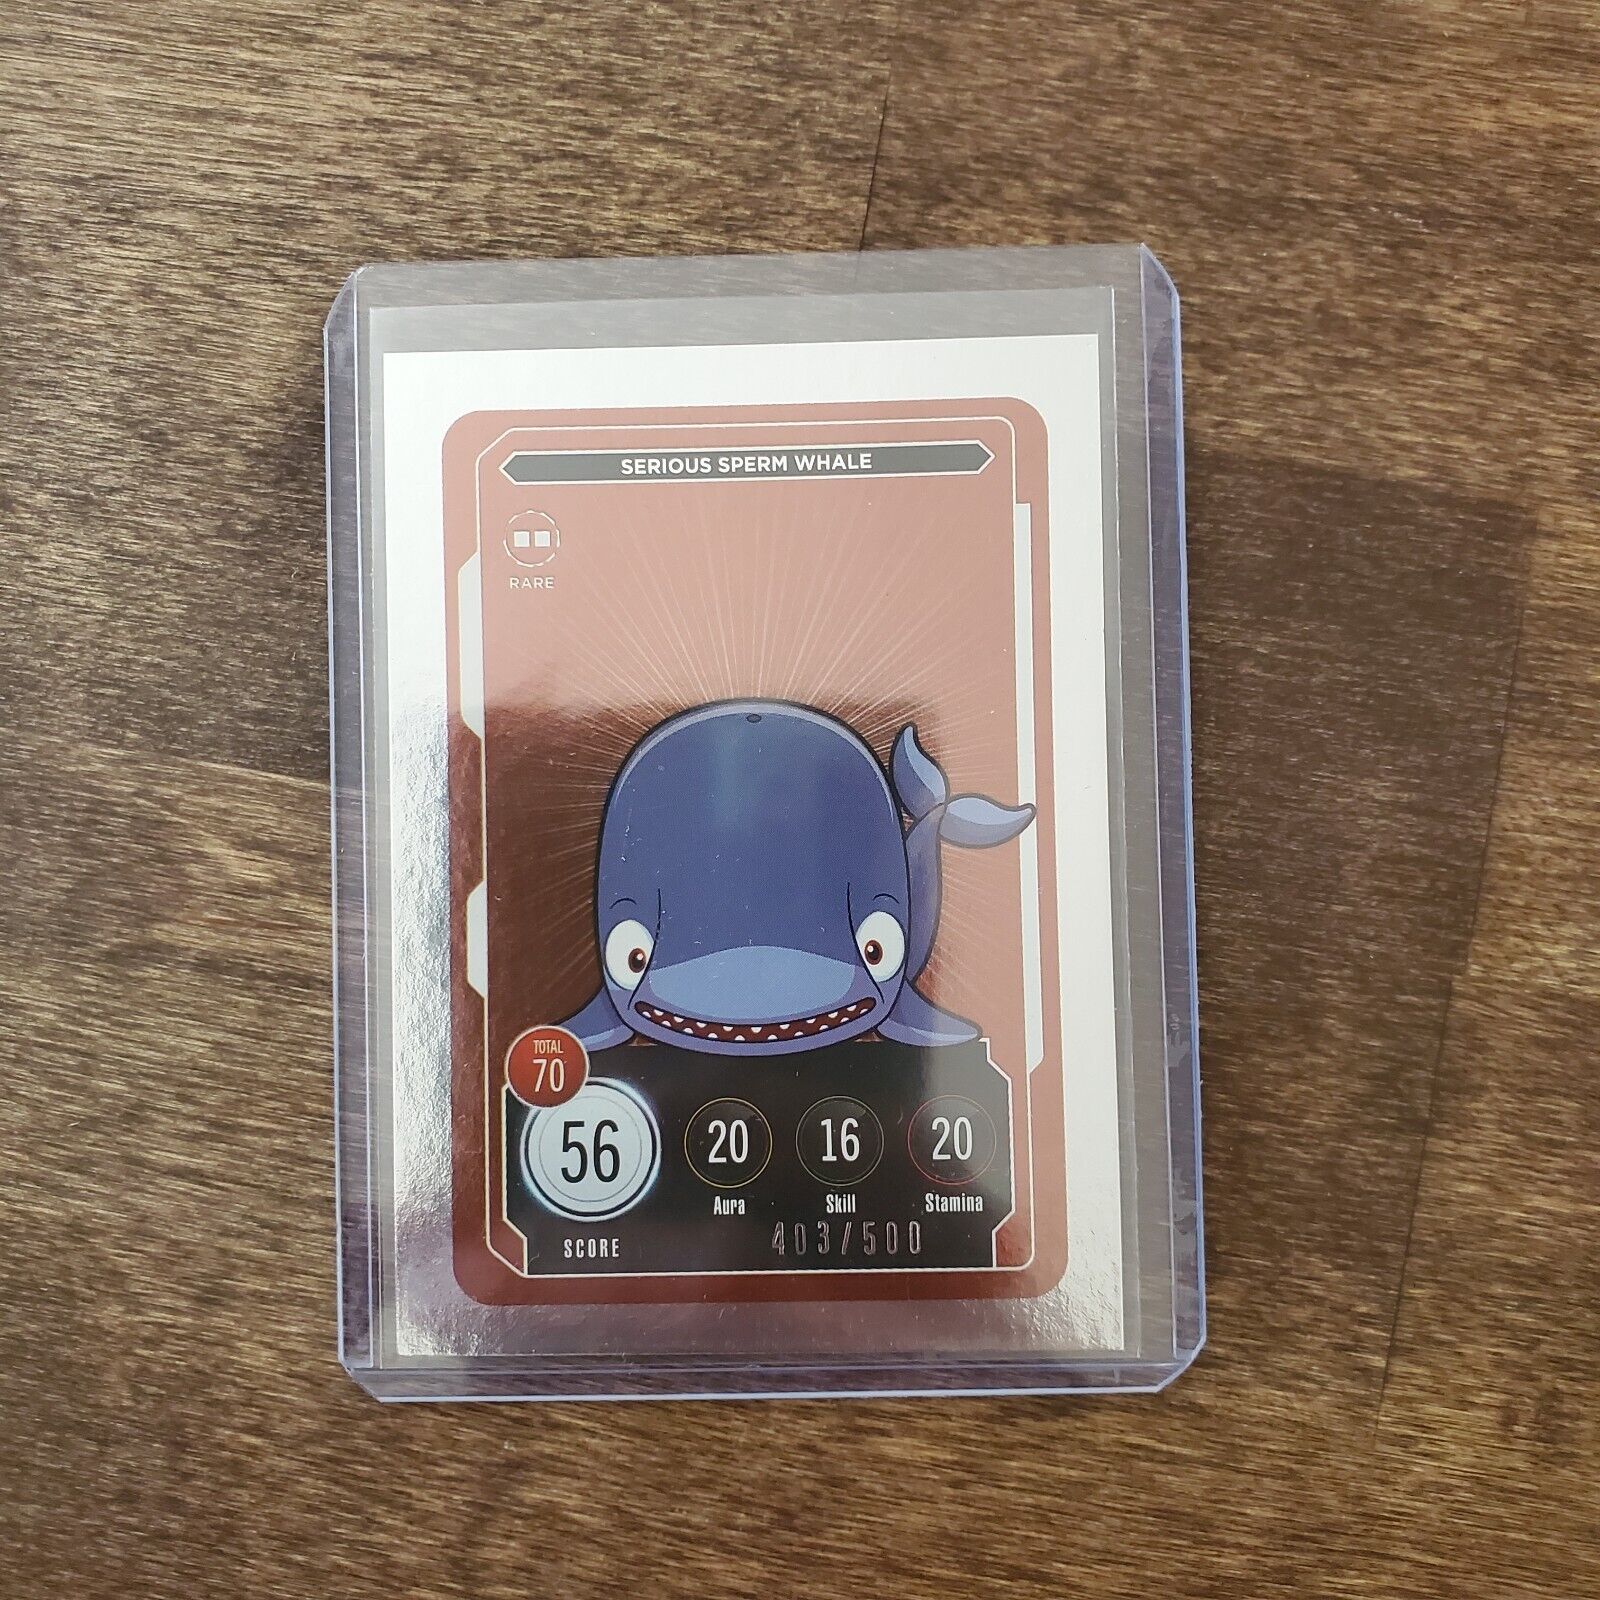 Serious Sperm Whale Rare Veefriends Series 2 Compete and Collect Card